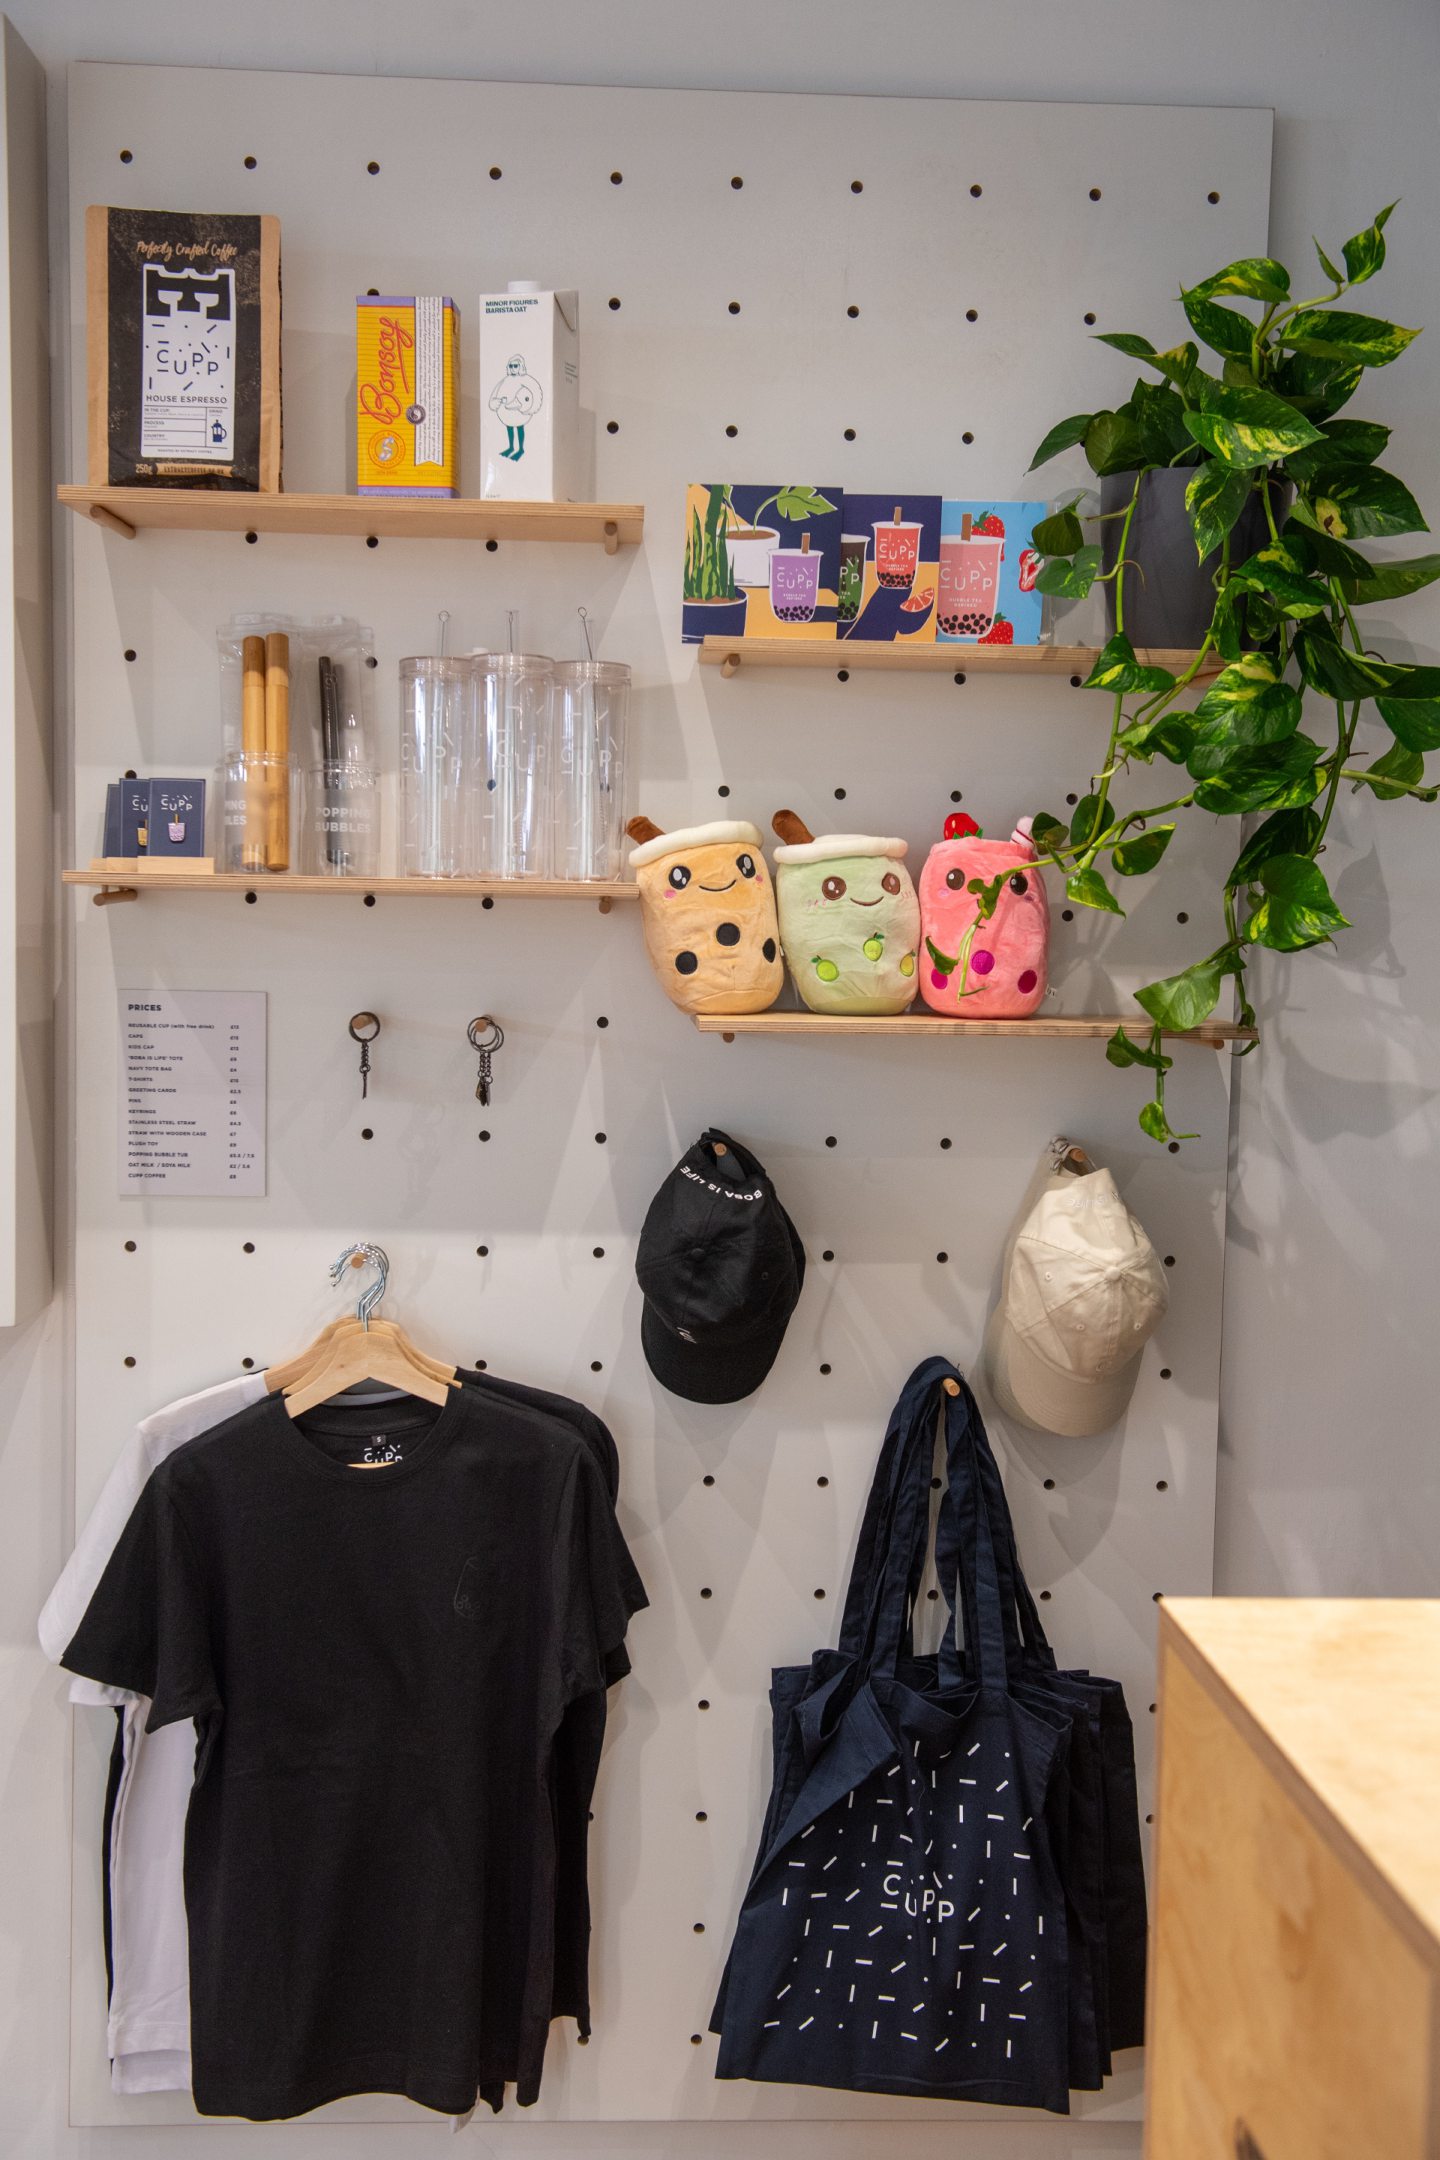 Wall inside shop featuring CUPP Bubble Tea merch including T-shirts, hats and plush toys.